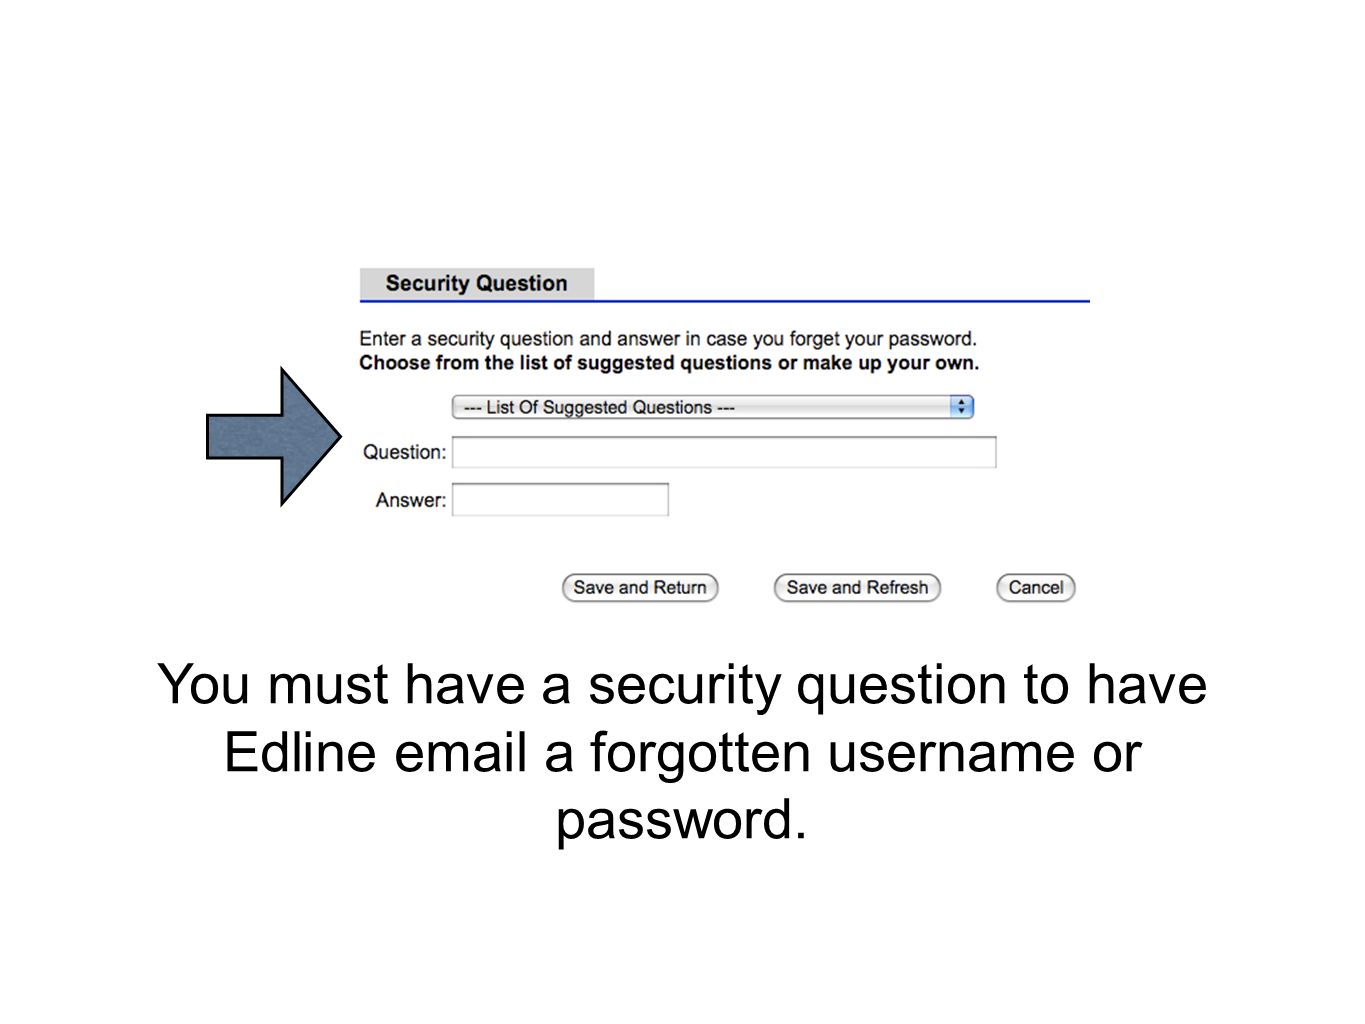 You must have a security question to have Edline  a forgotten username or password.